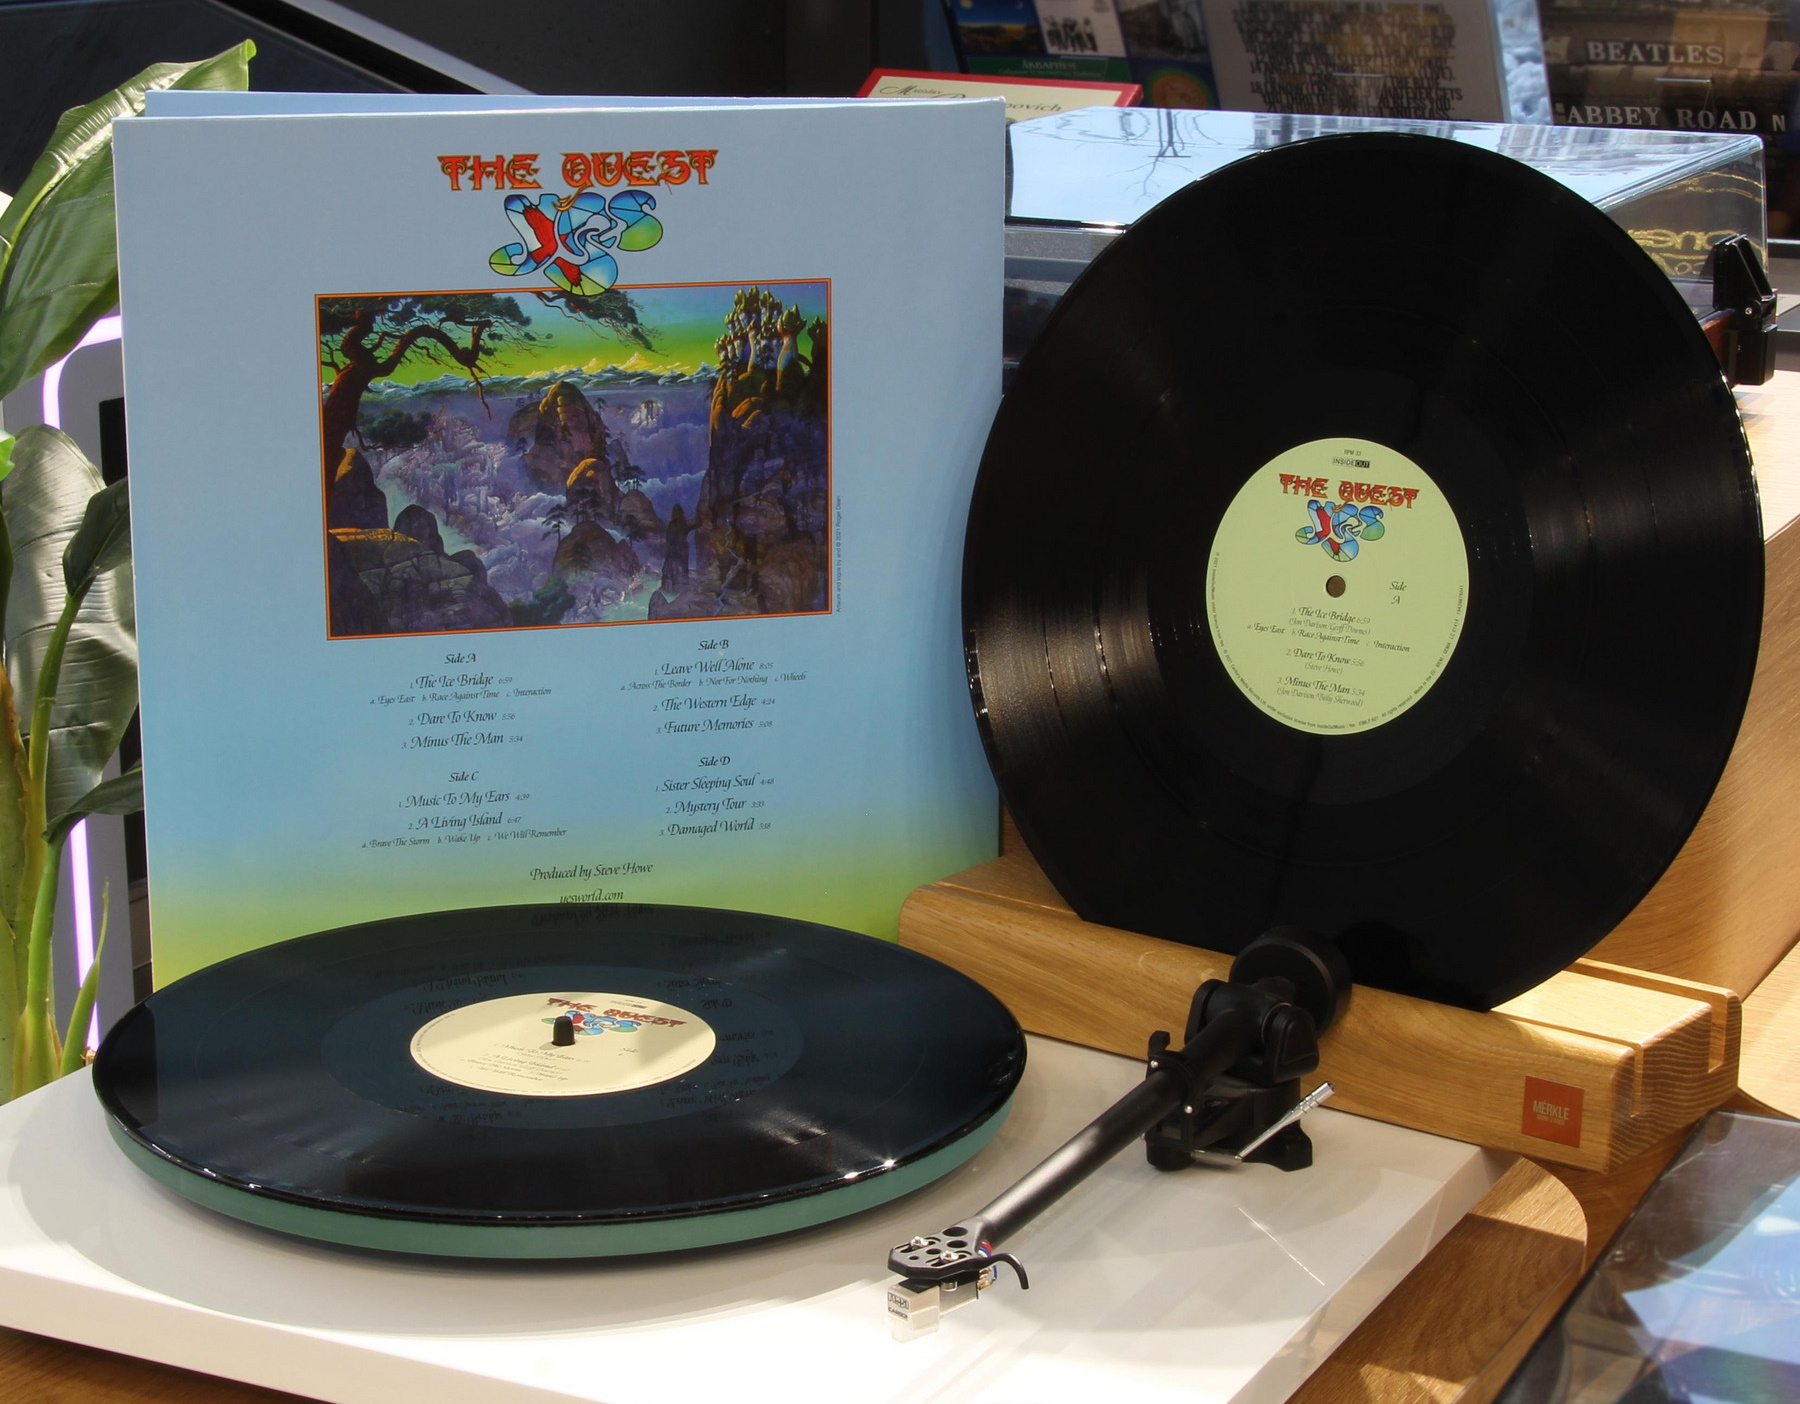 Yes – The Quest